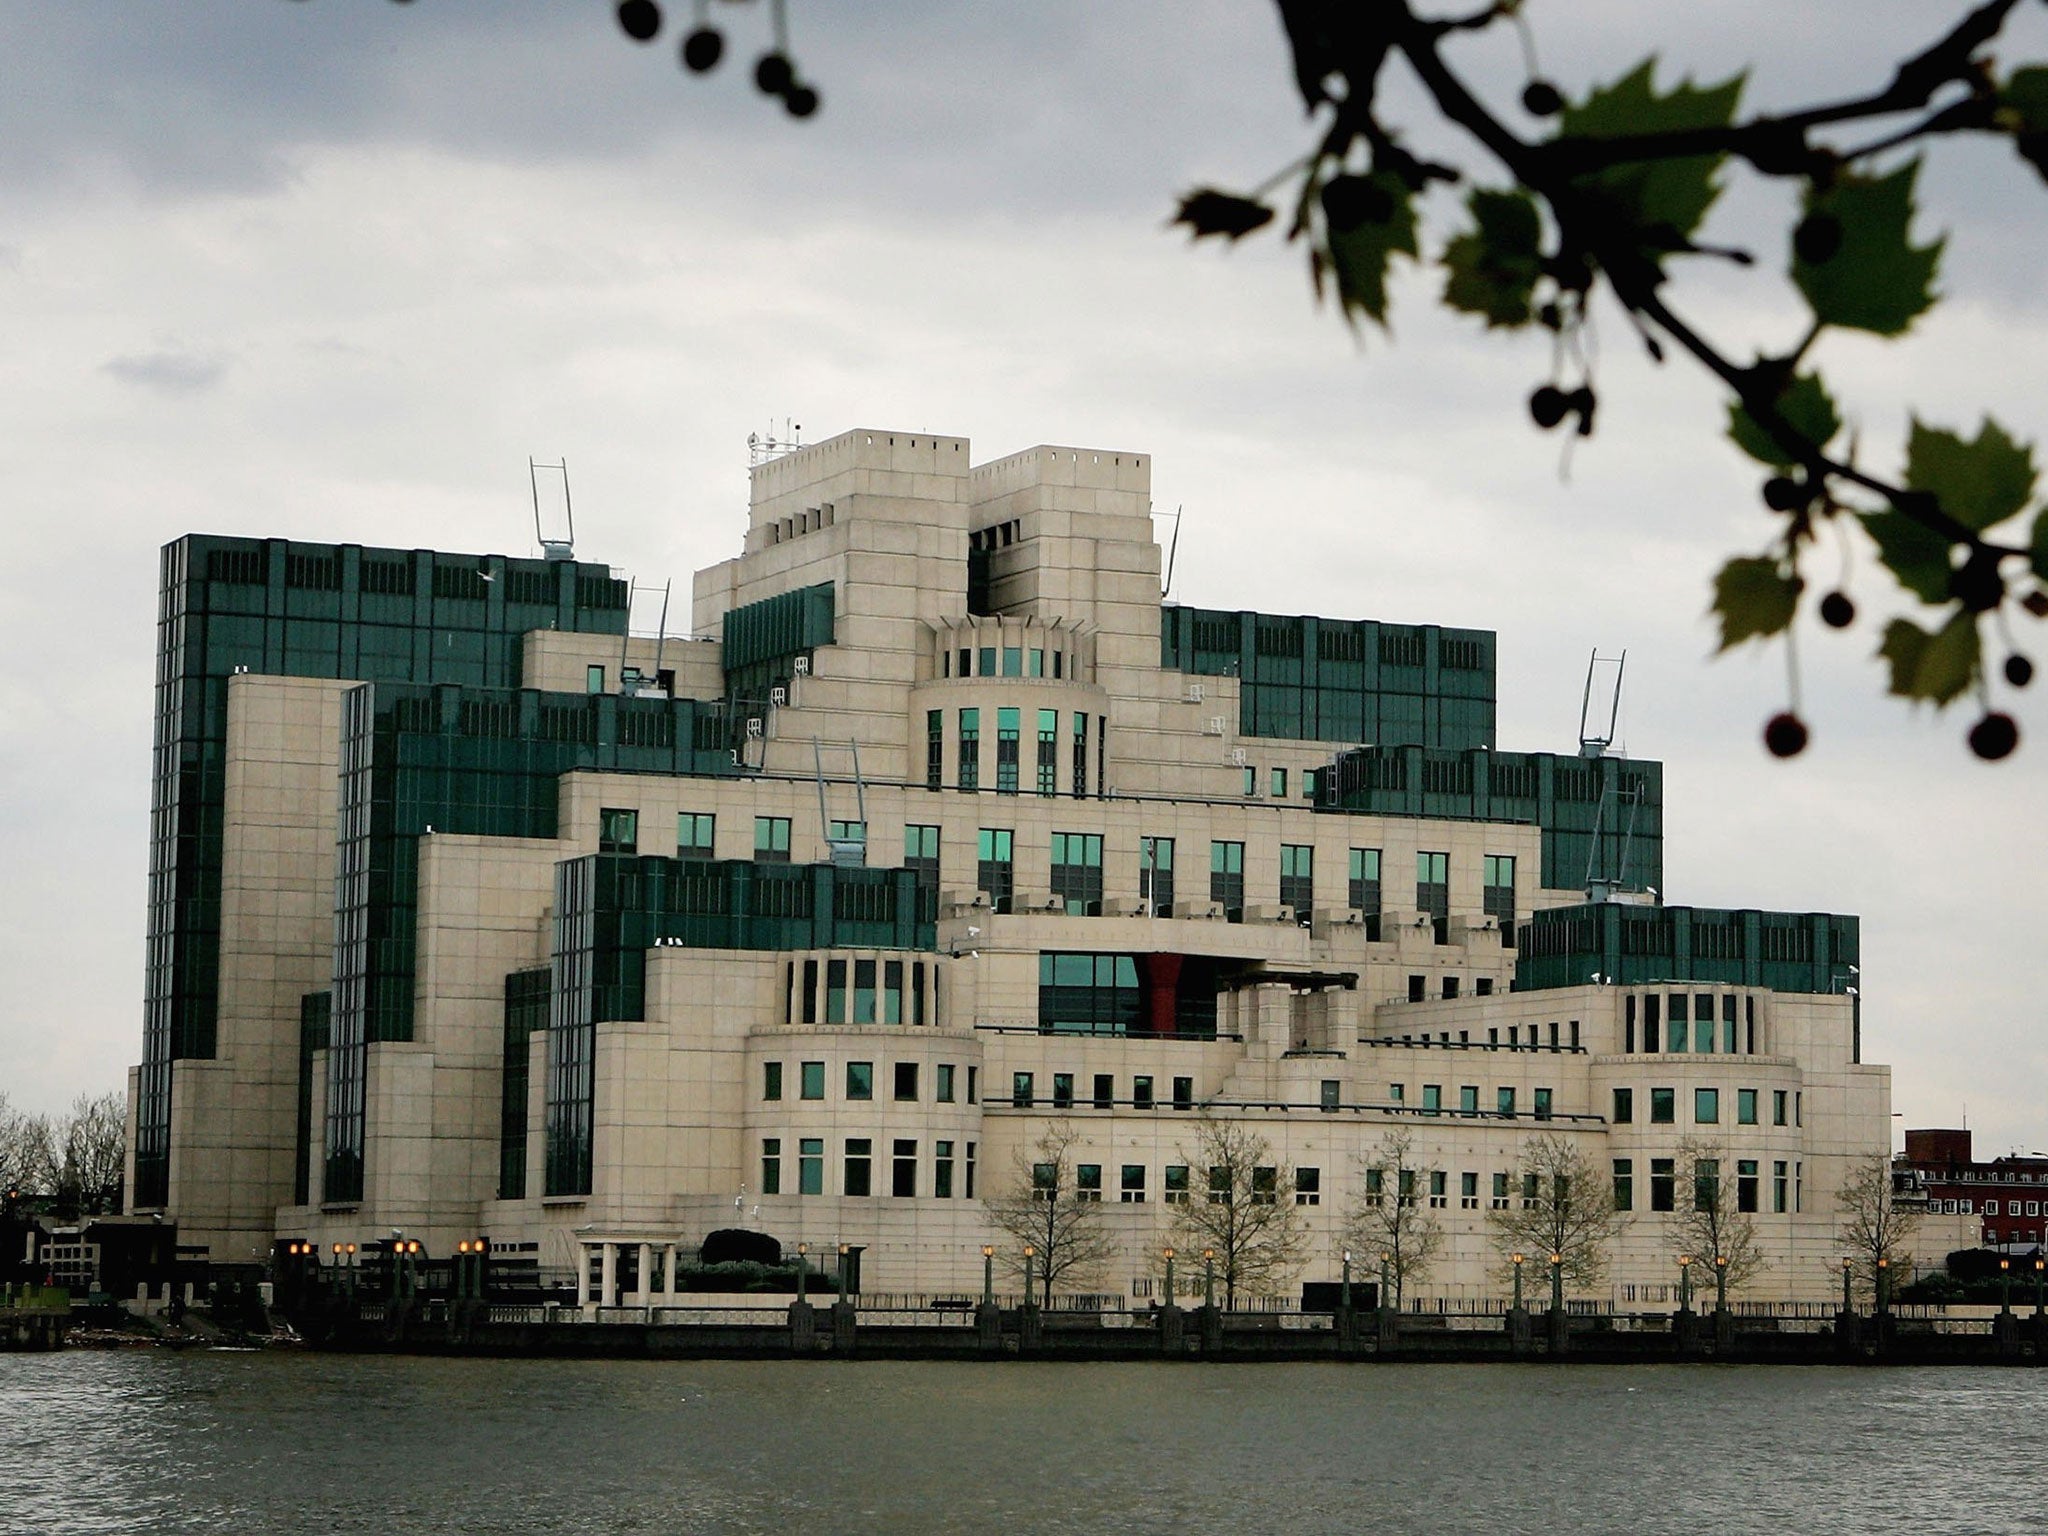 The legal action could require MI6 to reveal some of its most secret work